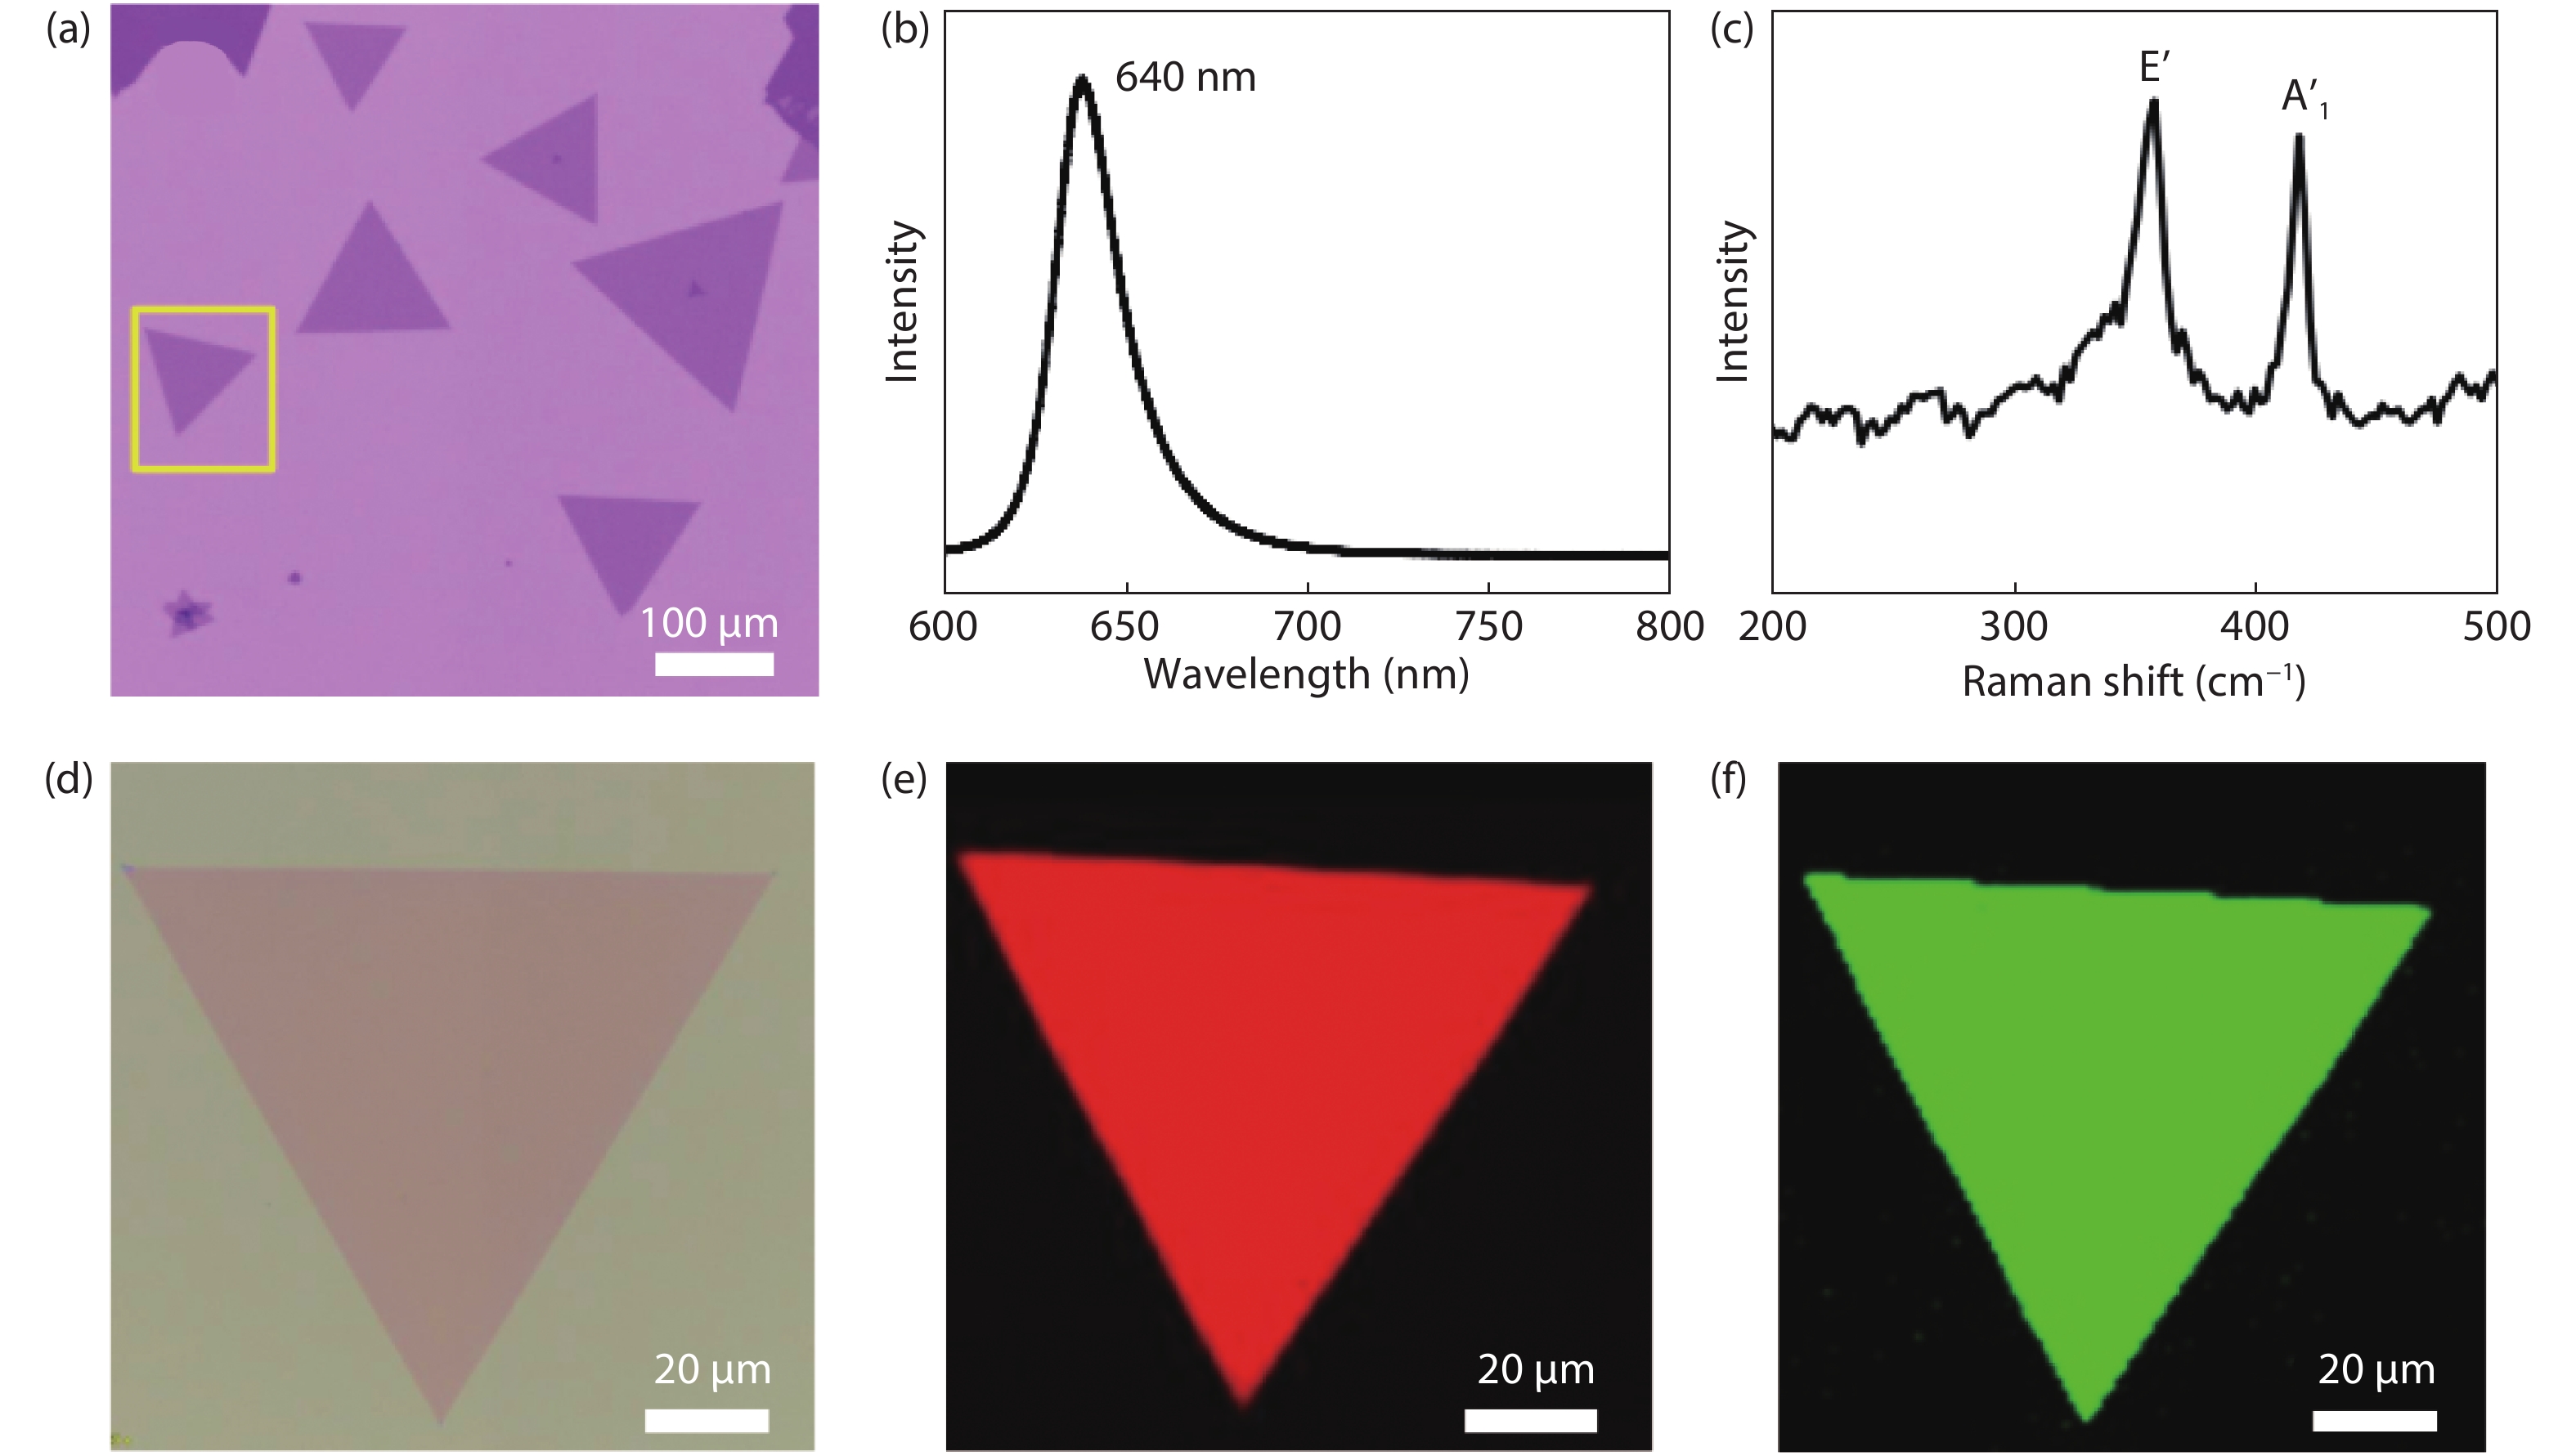 (Color online) (a) Optical image of monolayer WS2. (b) PL spectrum of WS2. (c) Raman spectrum of WS2. (d) Optical image of WS2 in the yellow rectangle of (a). (e) PL mapping image of monolayer WS2. (f) Raman mapping image of monolayer WS2.